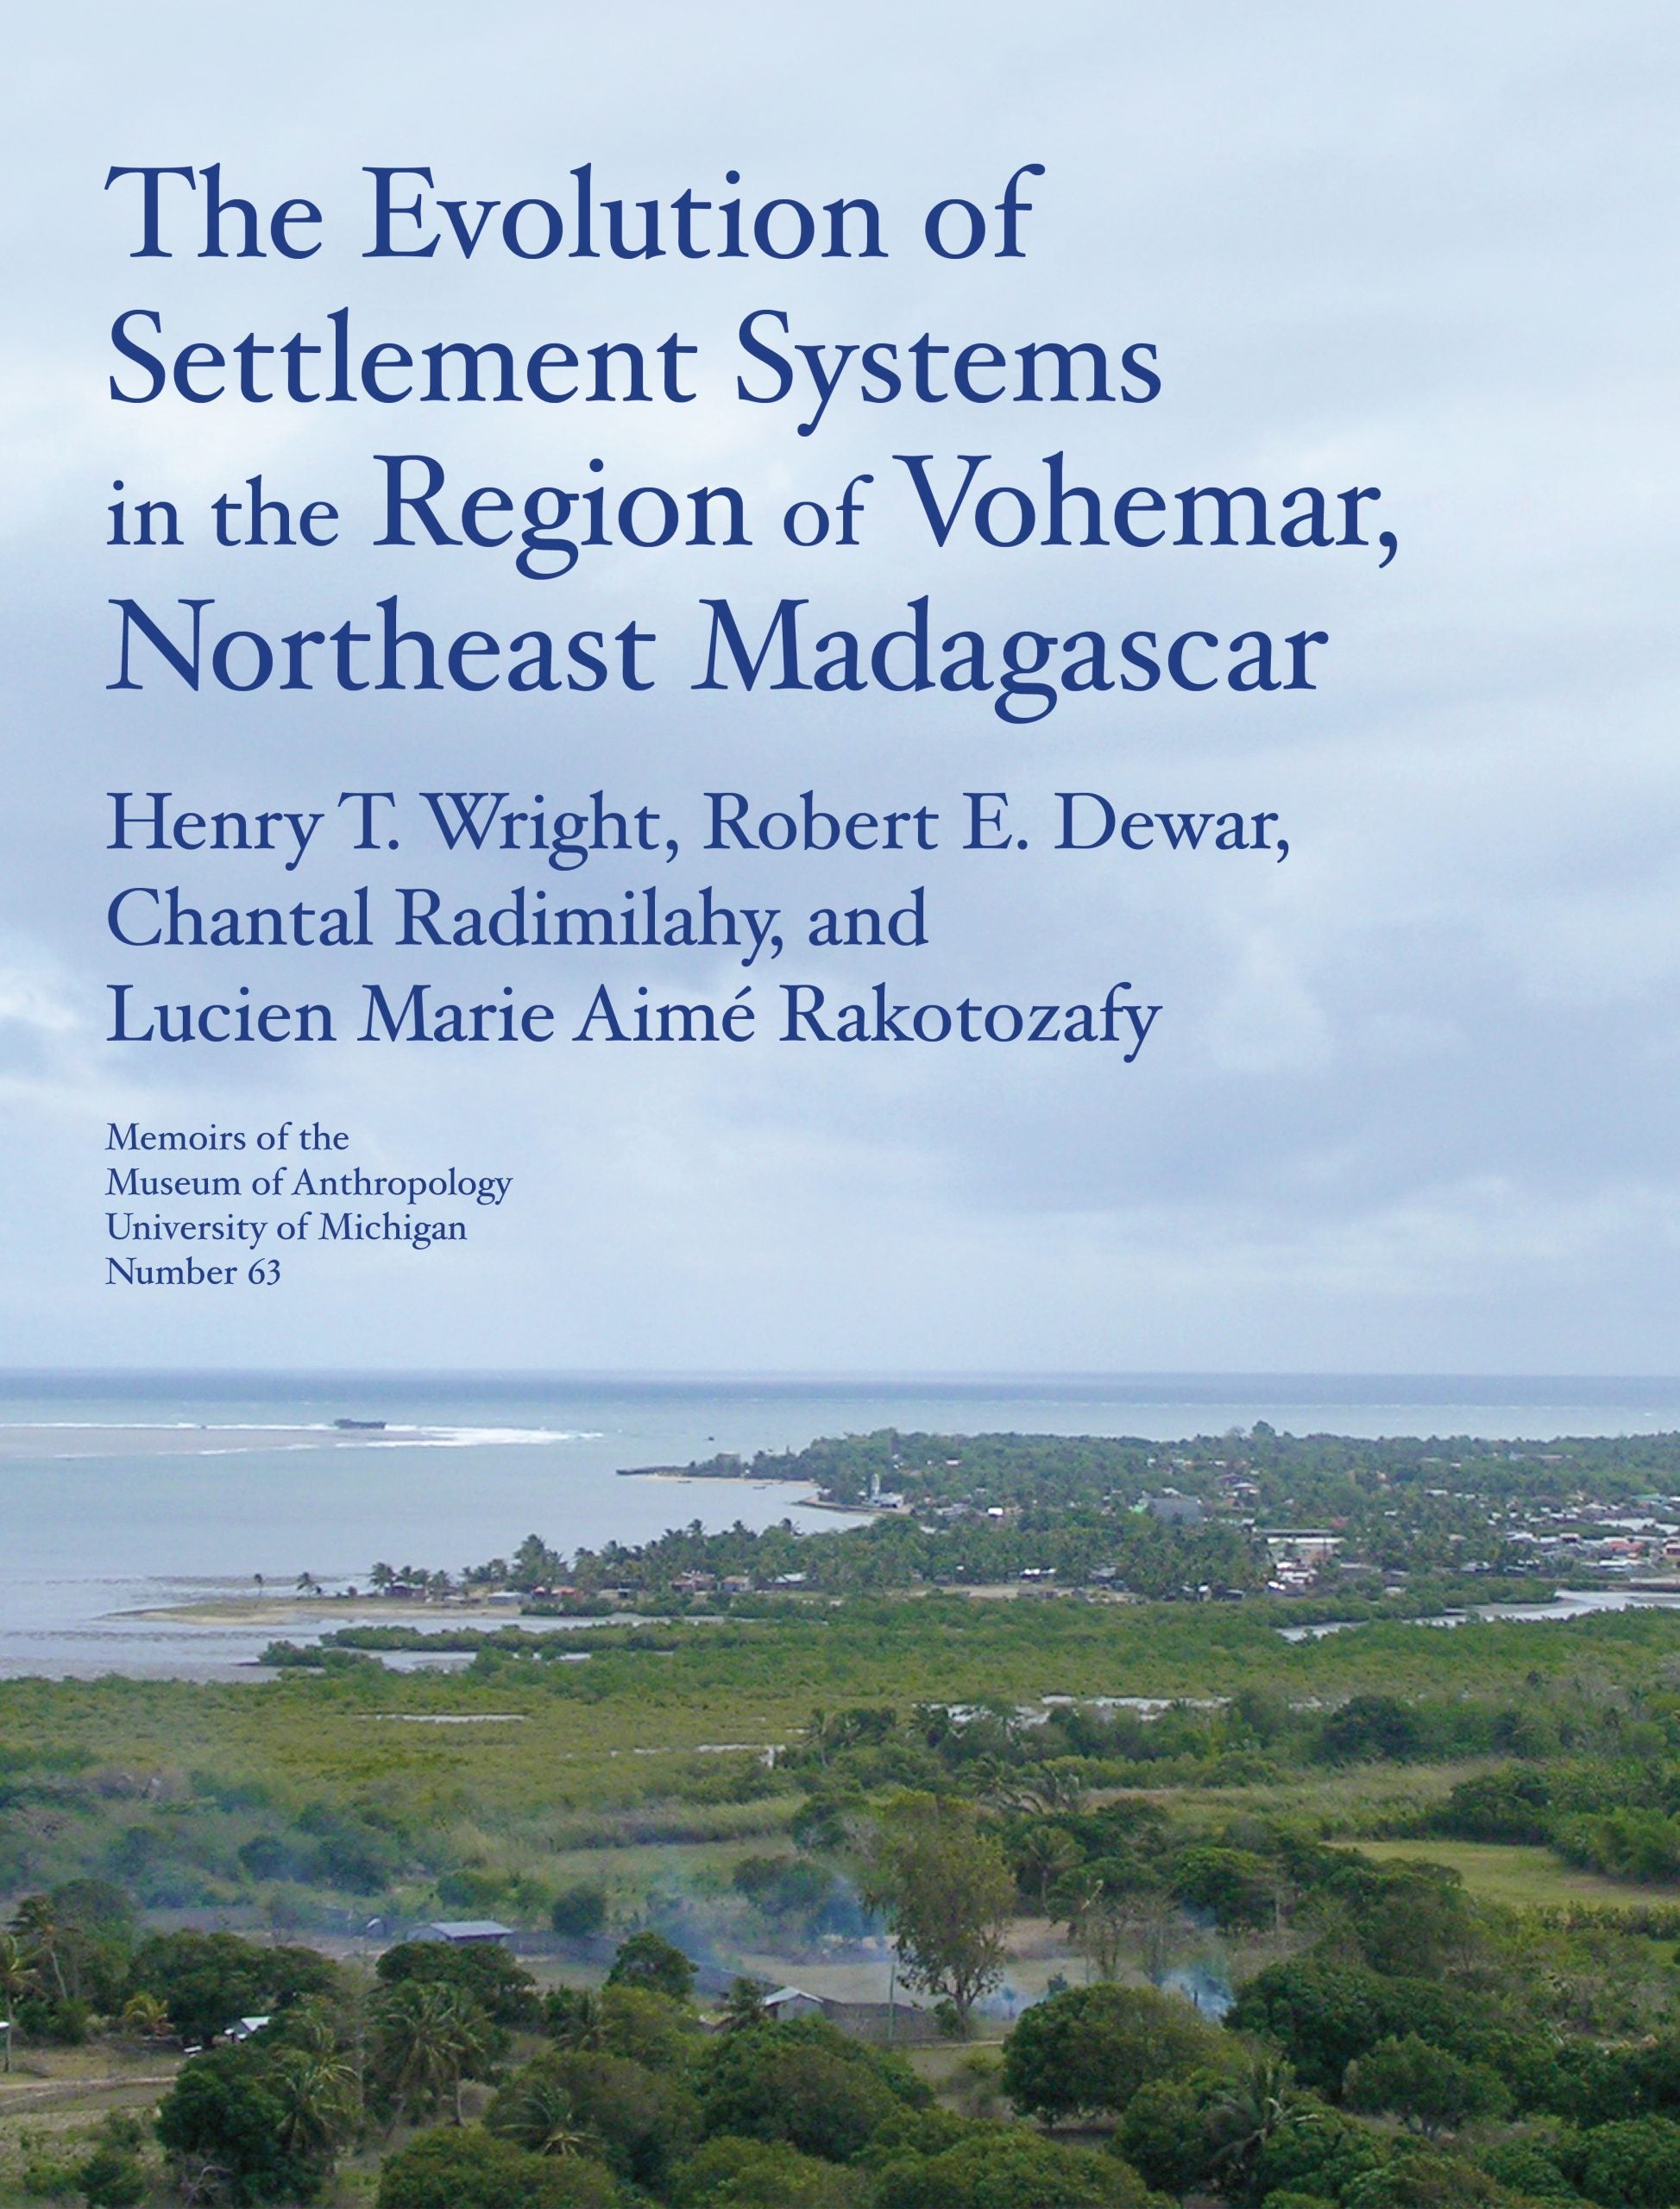 The Evolution of Settlement Systems in the Region of Vohemar, Northeast Madagascar